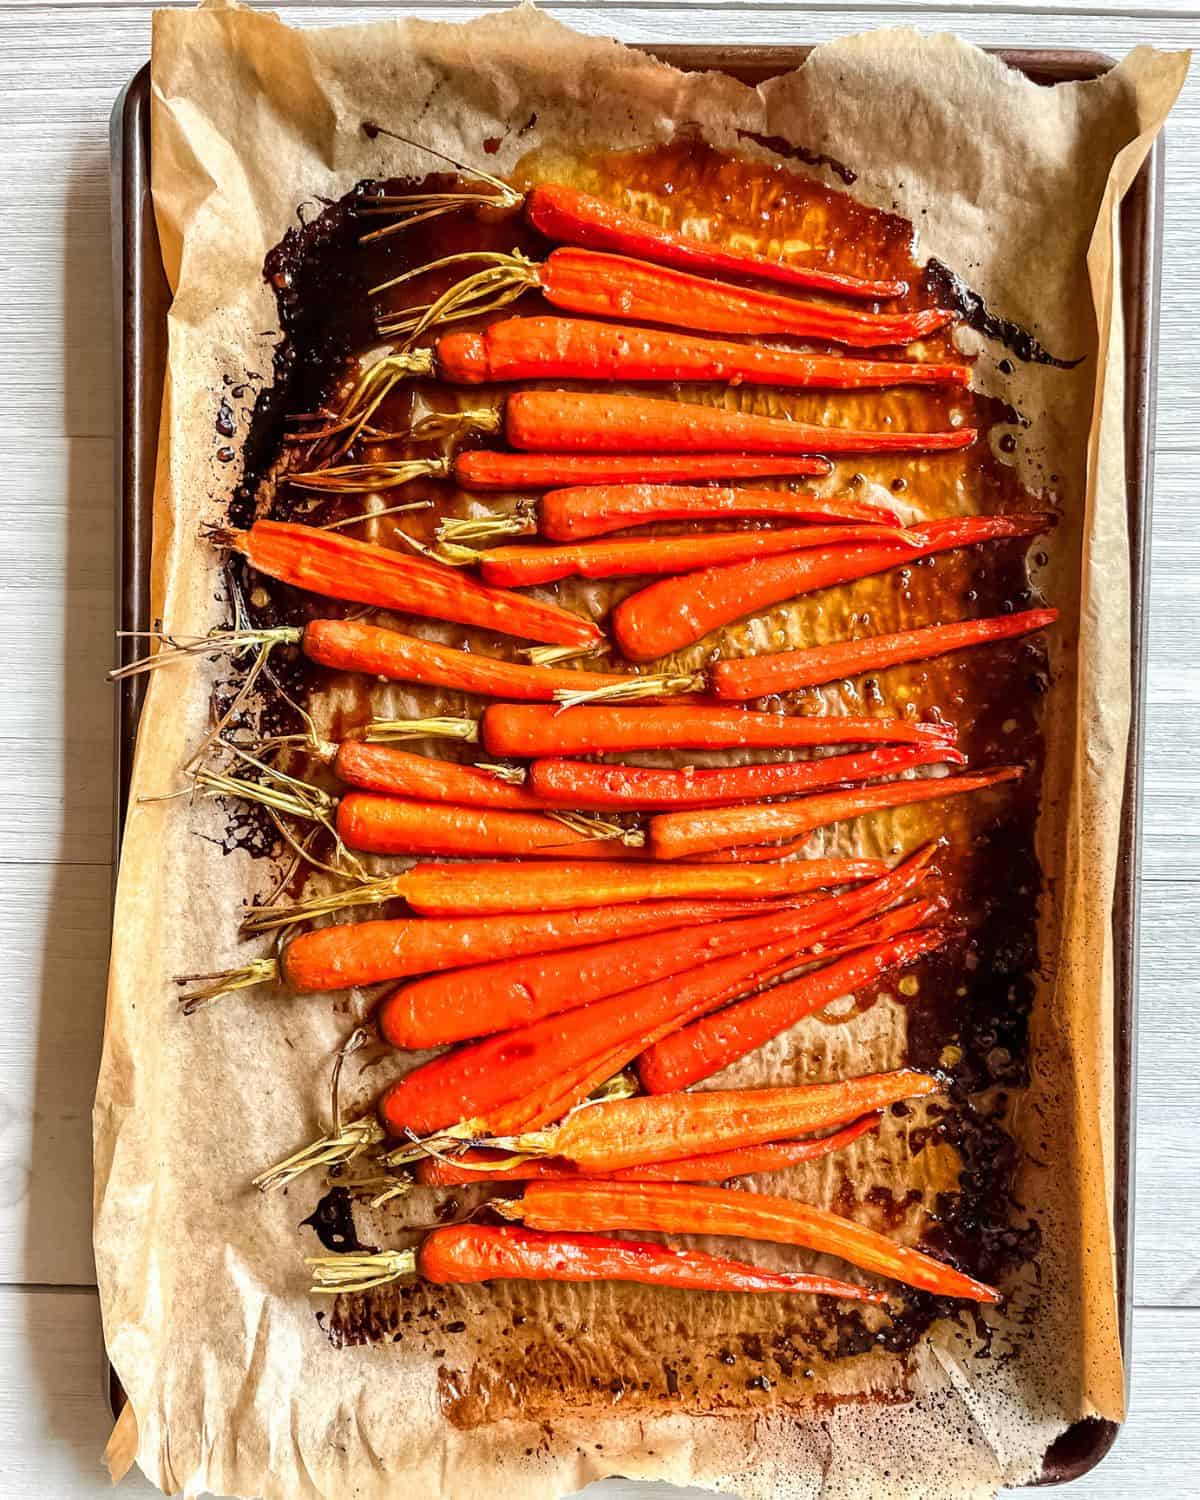 Roasted brown sugar glazed carrots on a parchment lined baking sheet.